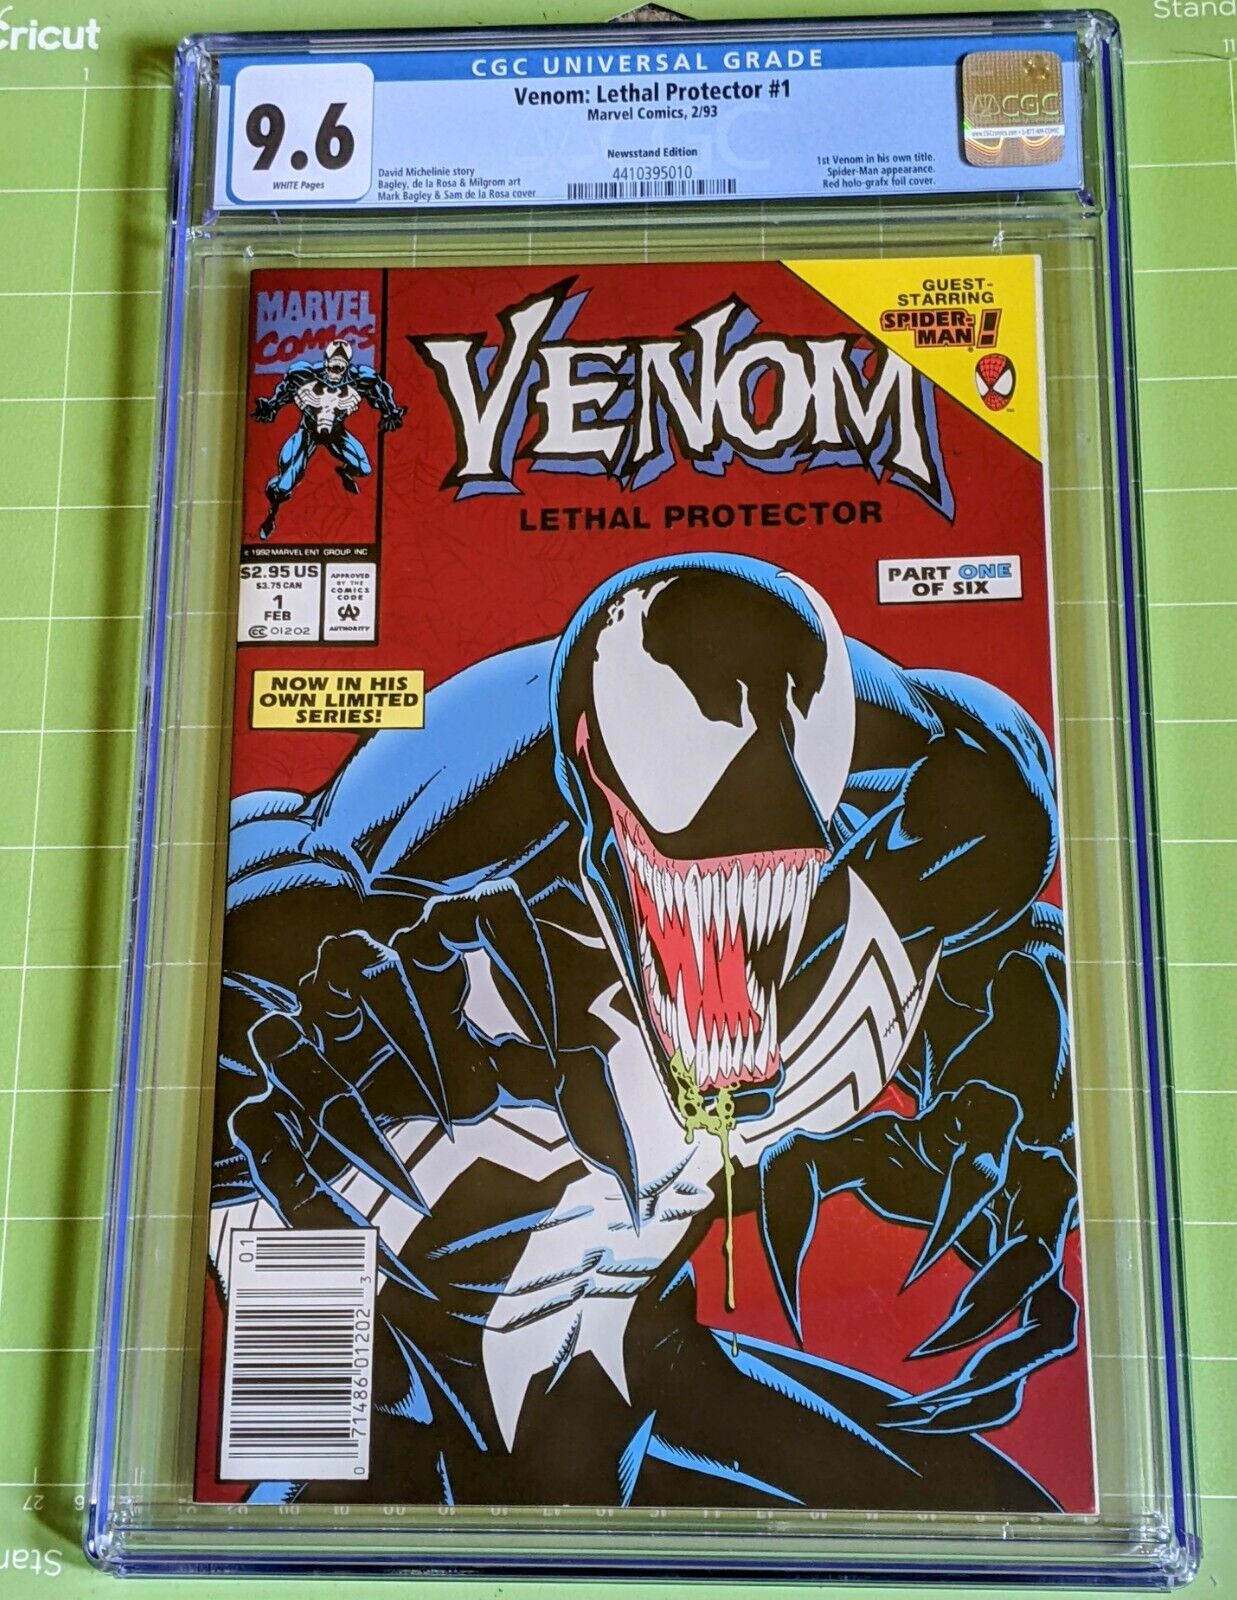 Venom: Lethal Protector #1 CGC 9.6/NM+ WhPgs Newsstand Ed. 1st Venom Solo Series